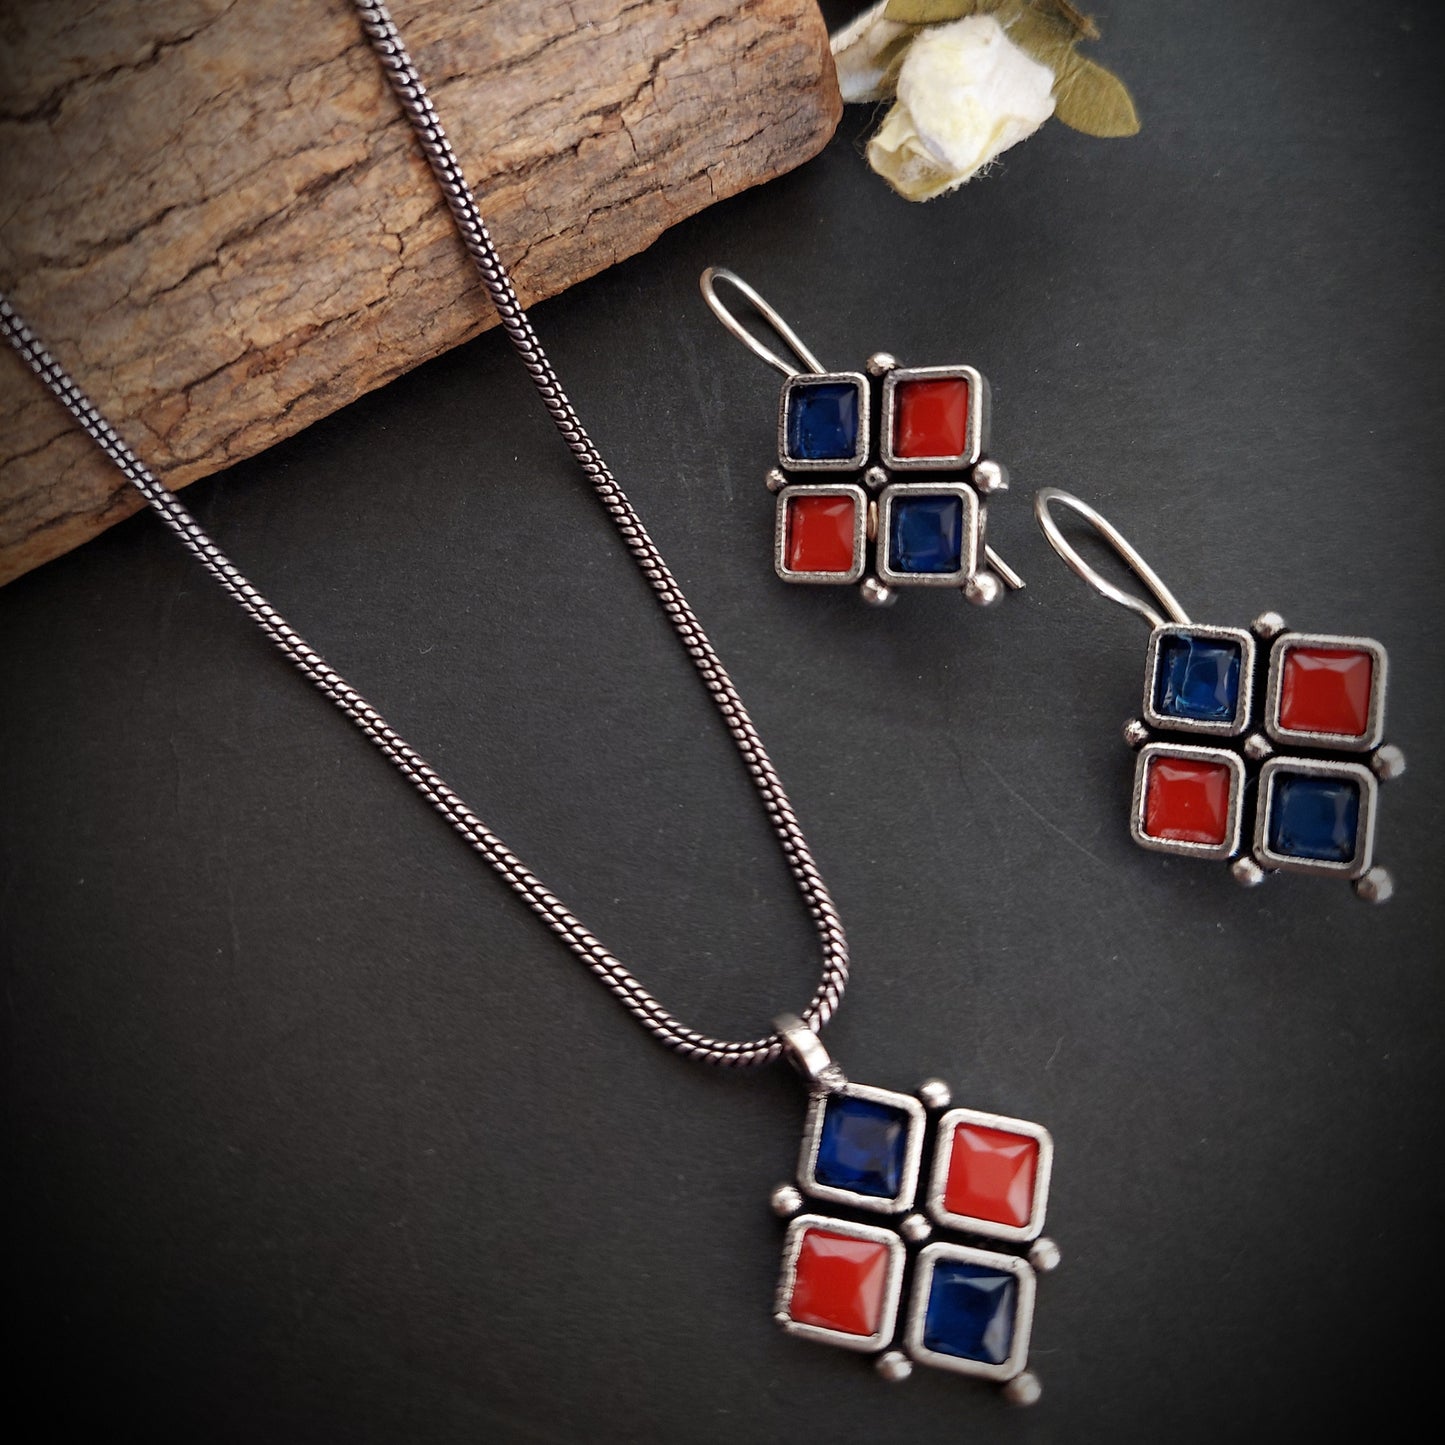 Aashirs Silver Toned Stone Setting Pendant Earring Set - Red and Blue